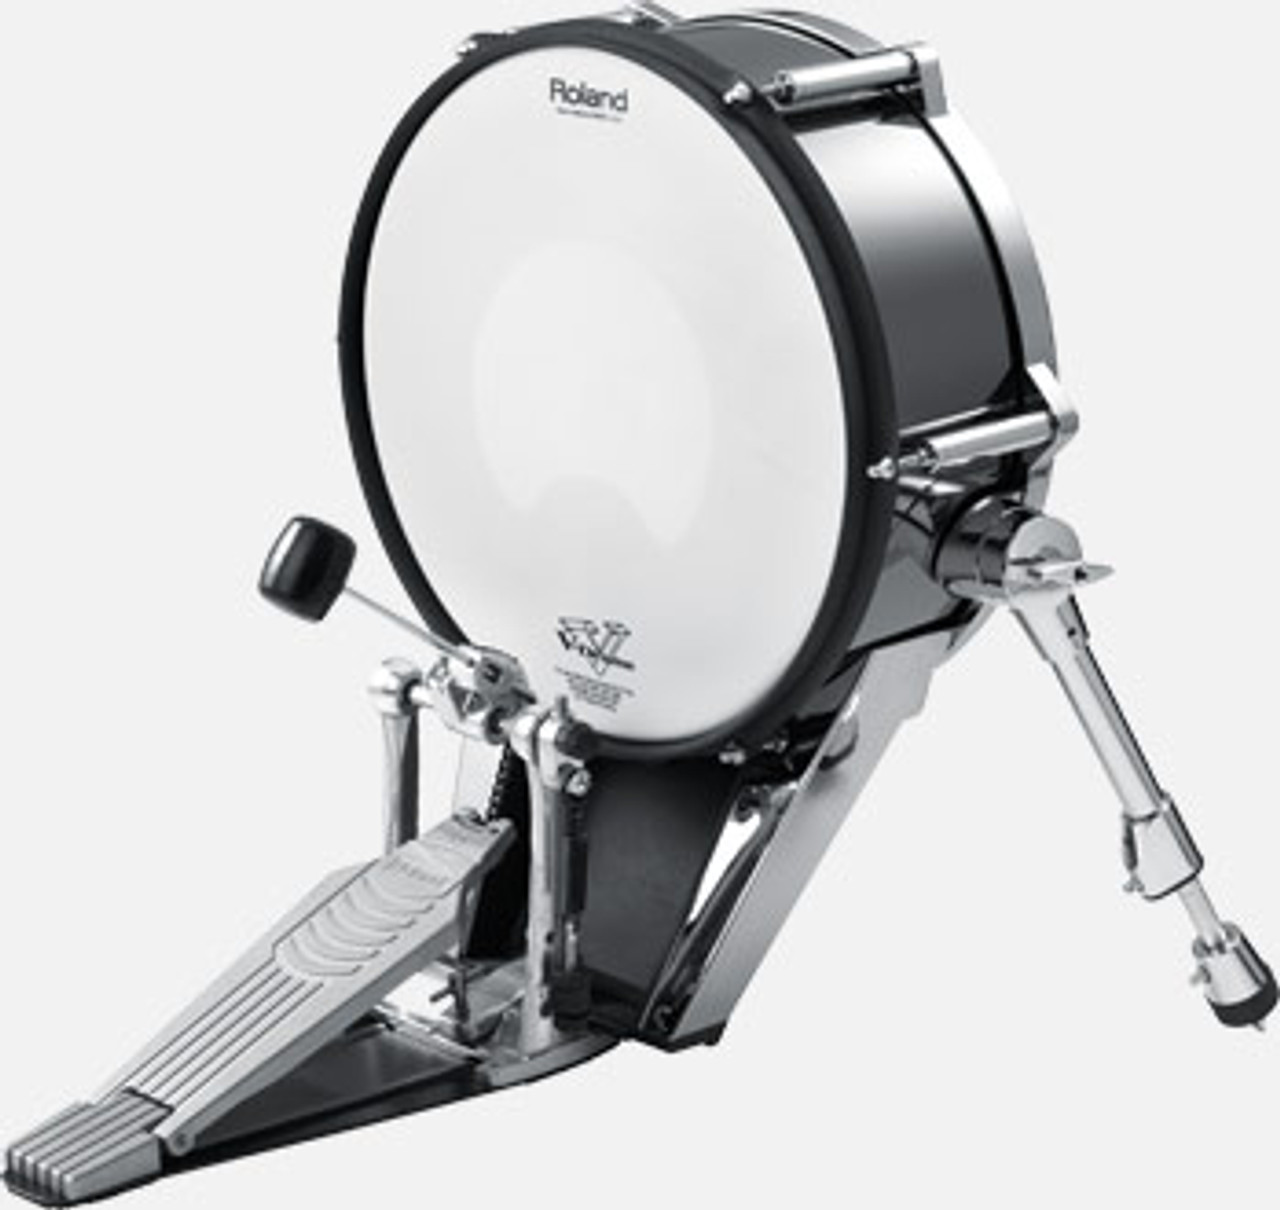 Enlarged (14-inch) bass-drum with solid-metal frame.